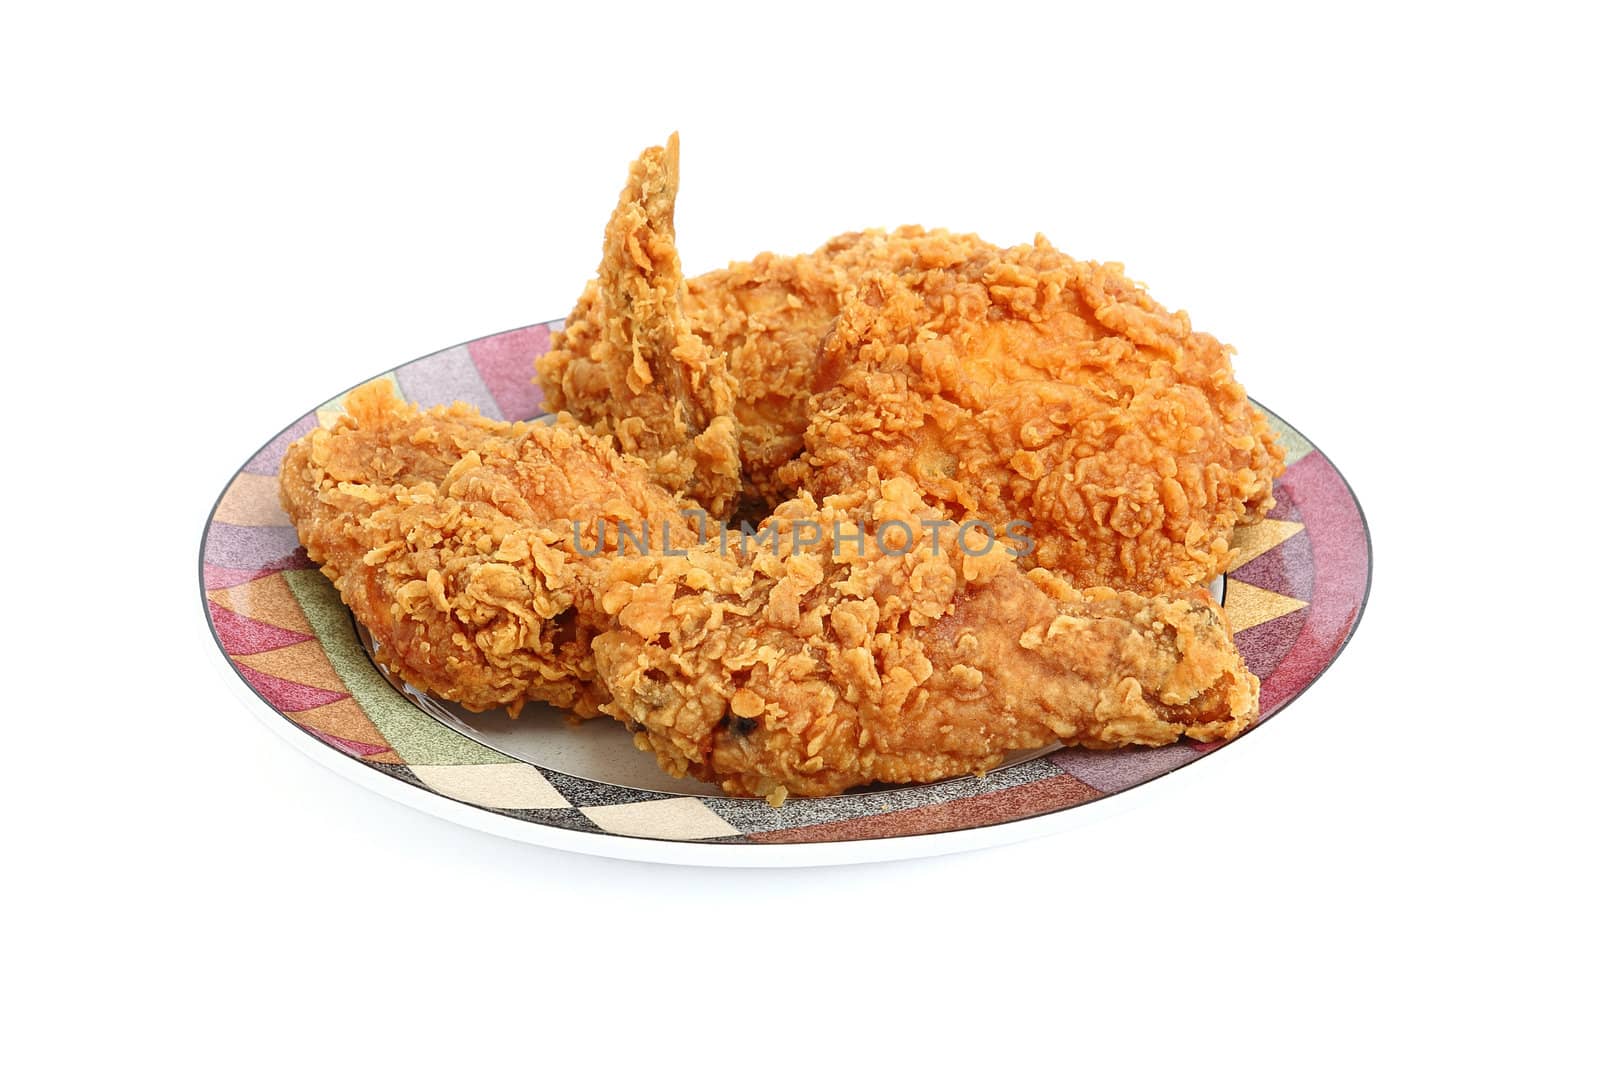 Crispy fried chicken on a plate on white background